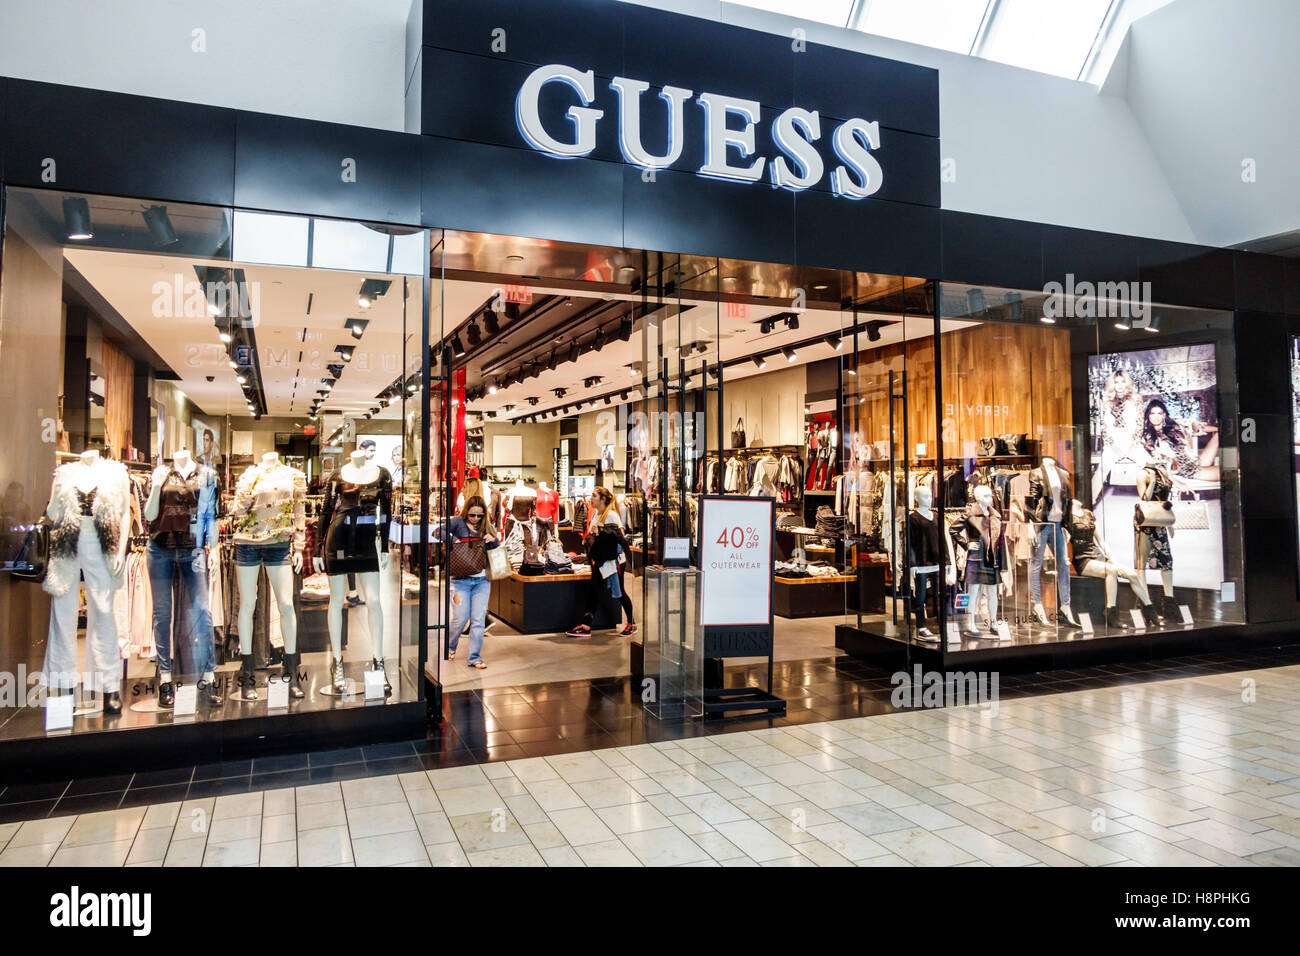 Guess Clothing Store Stock Photos & Guess Clothing Store Stock ...